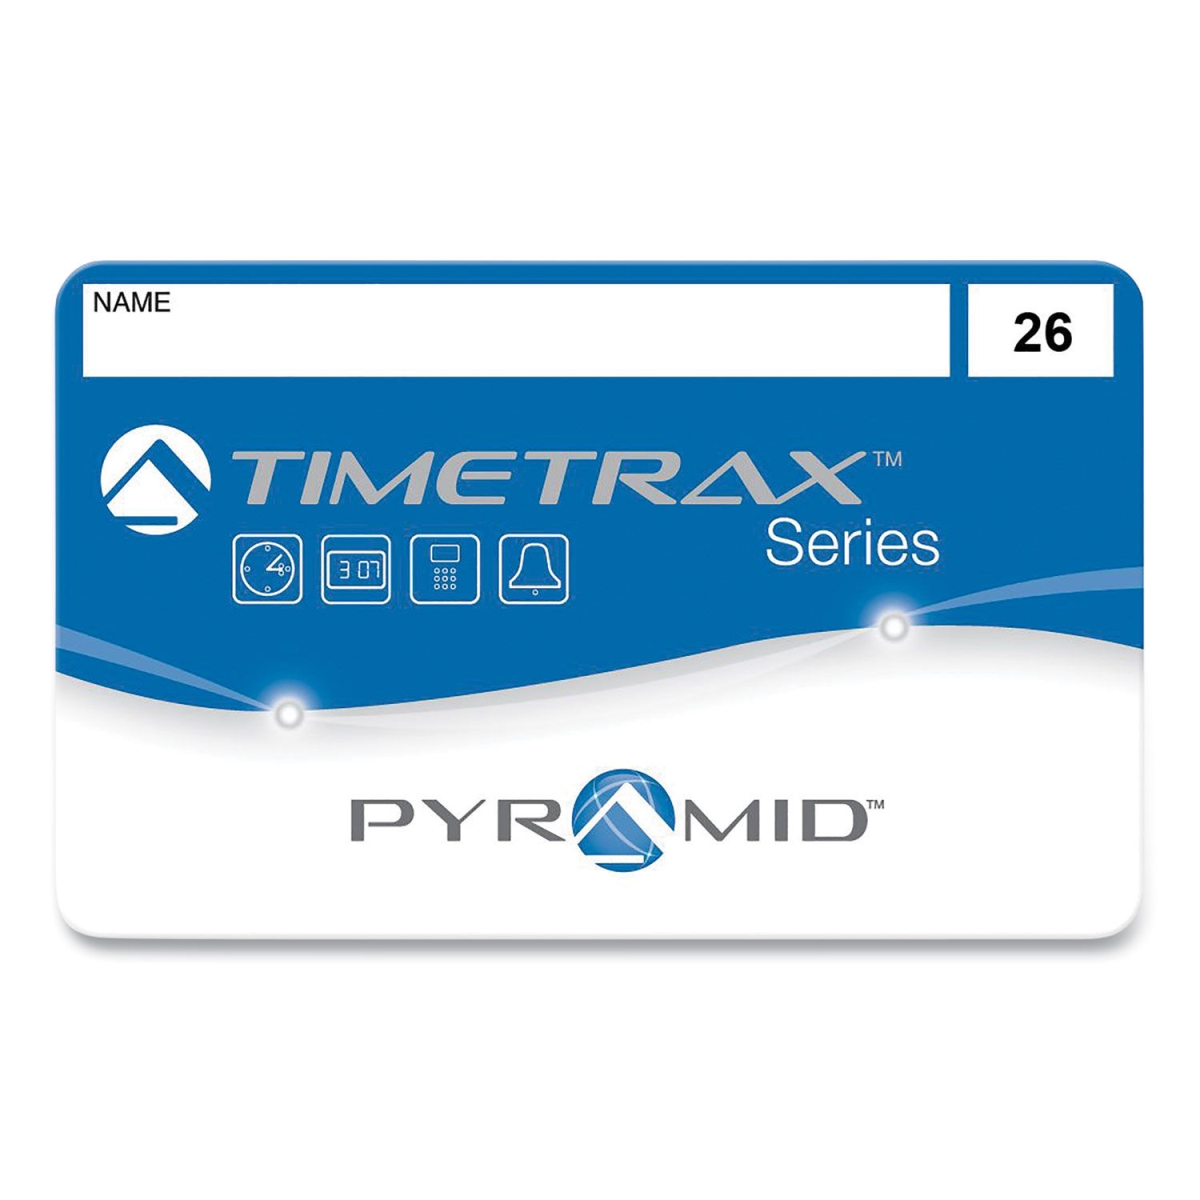 Picture of Pyramid Technologies 41303 Swipe Cards for Time Trax Clocks